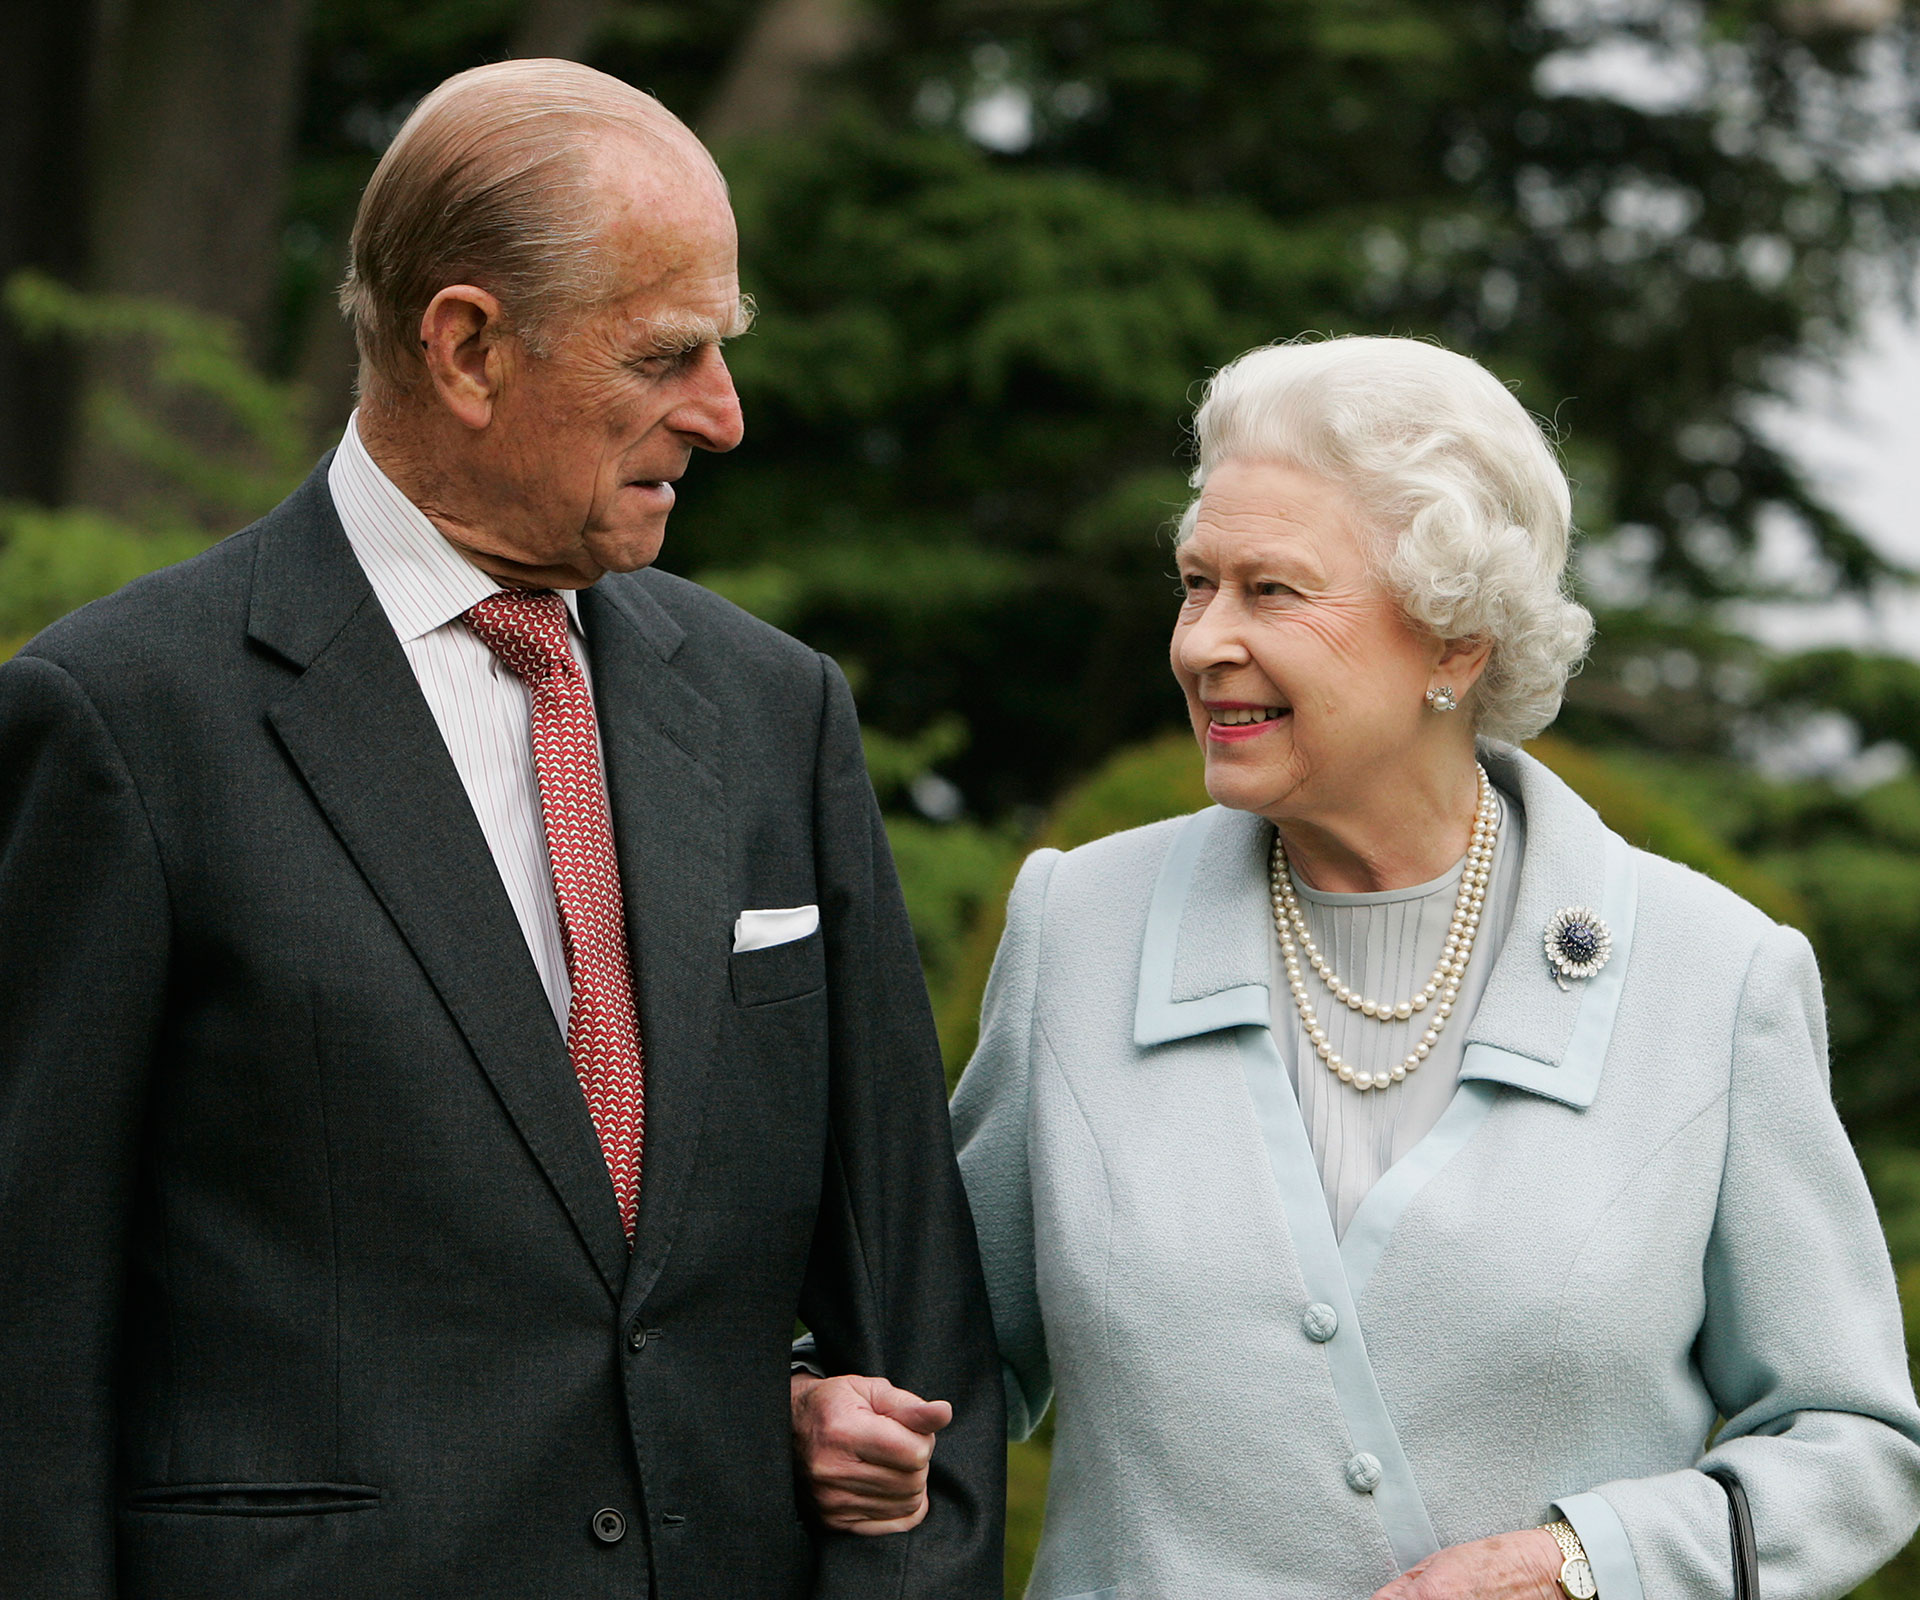 Why the Queen is certain Prince Philip has never cheated